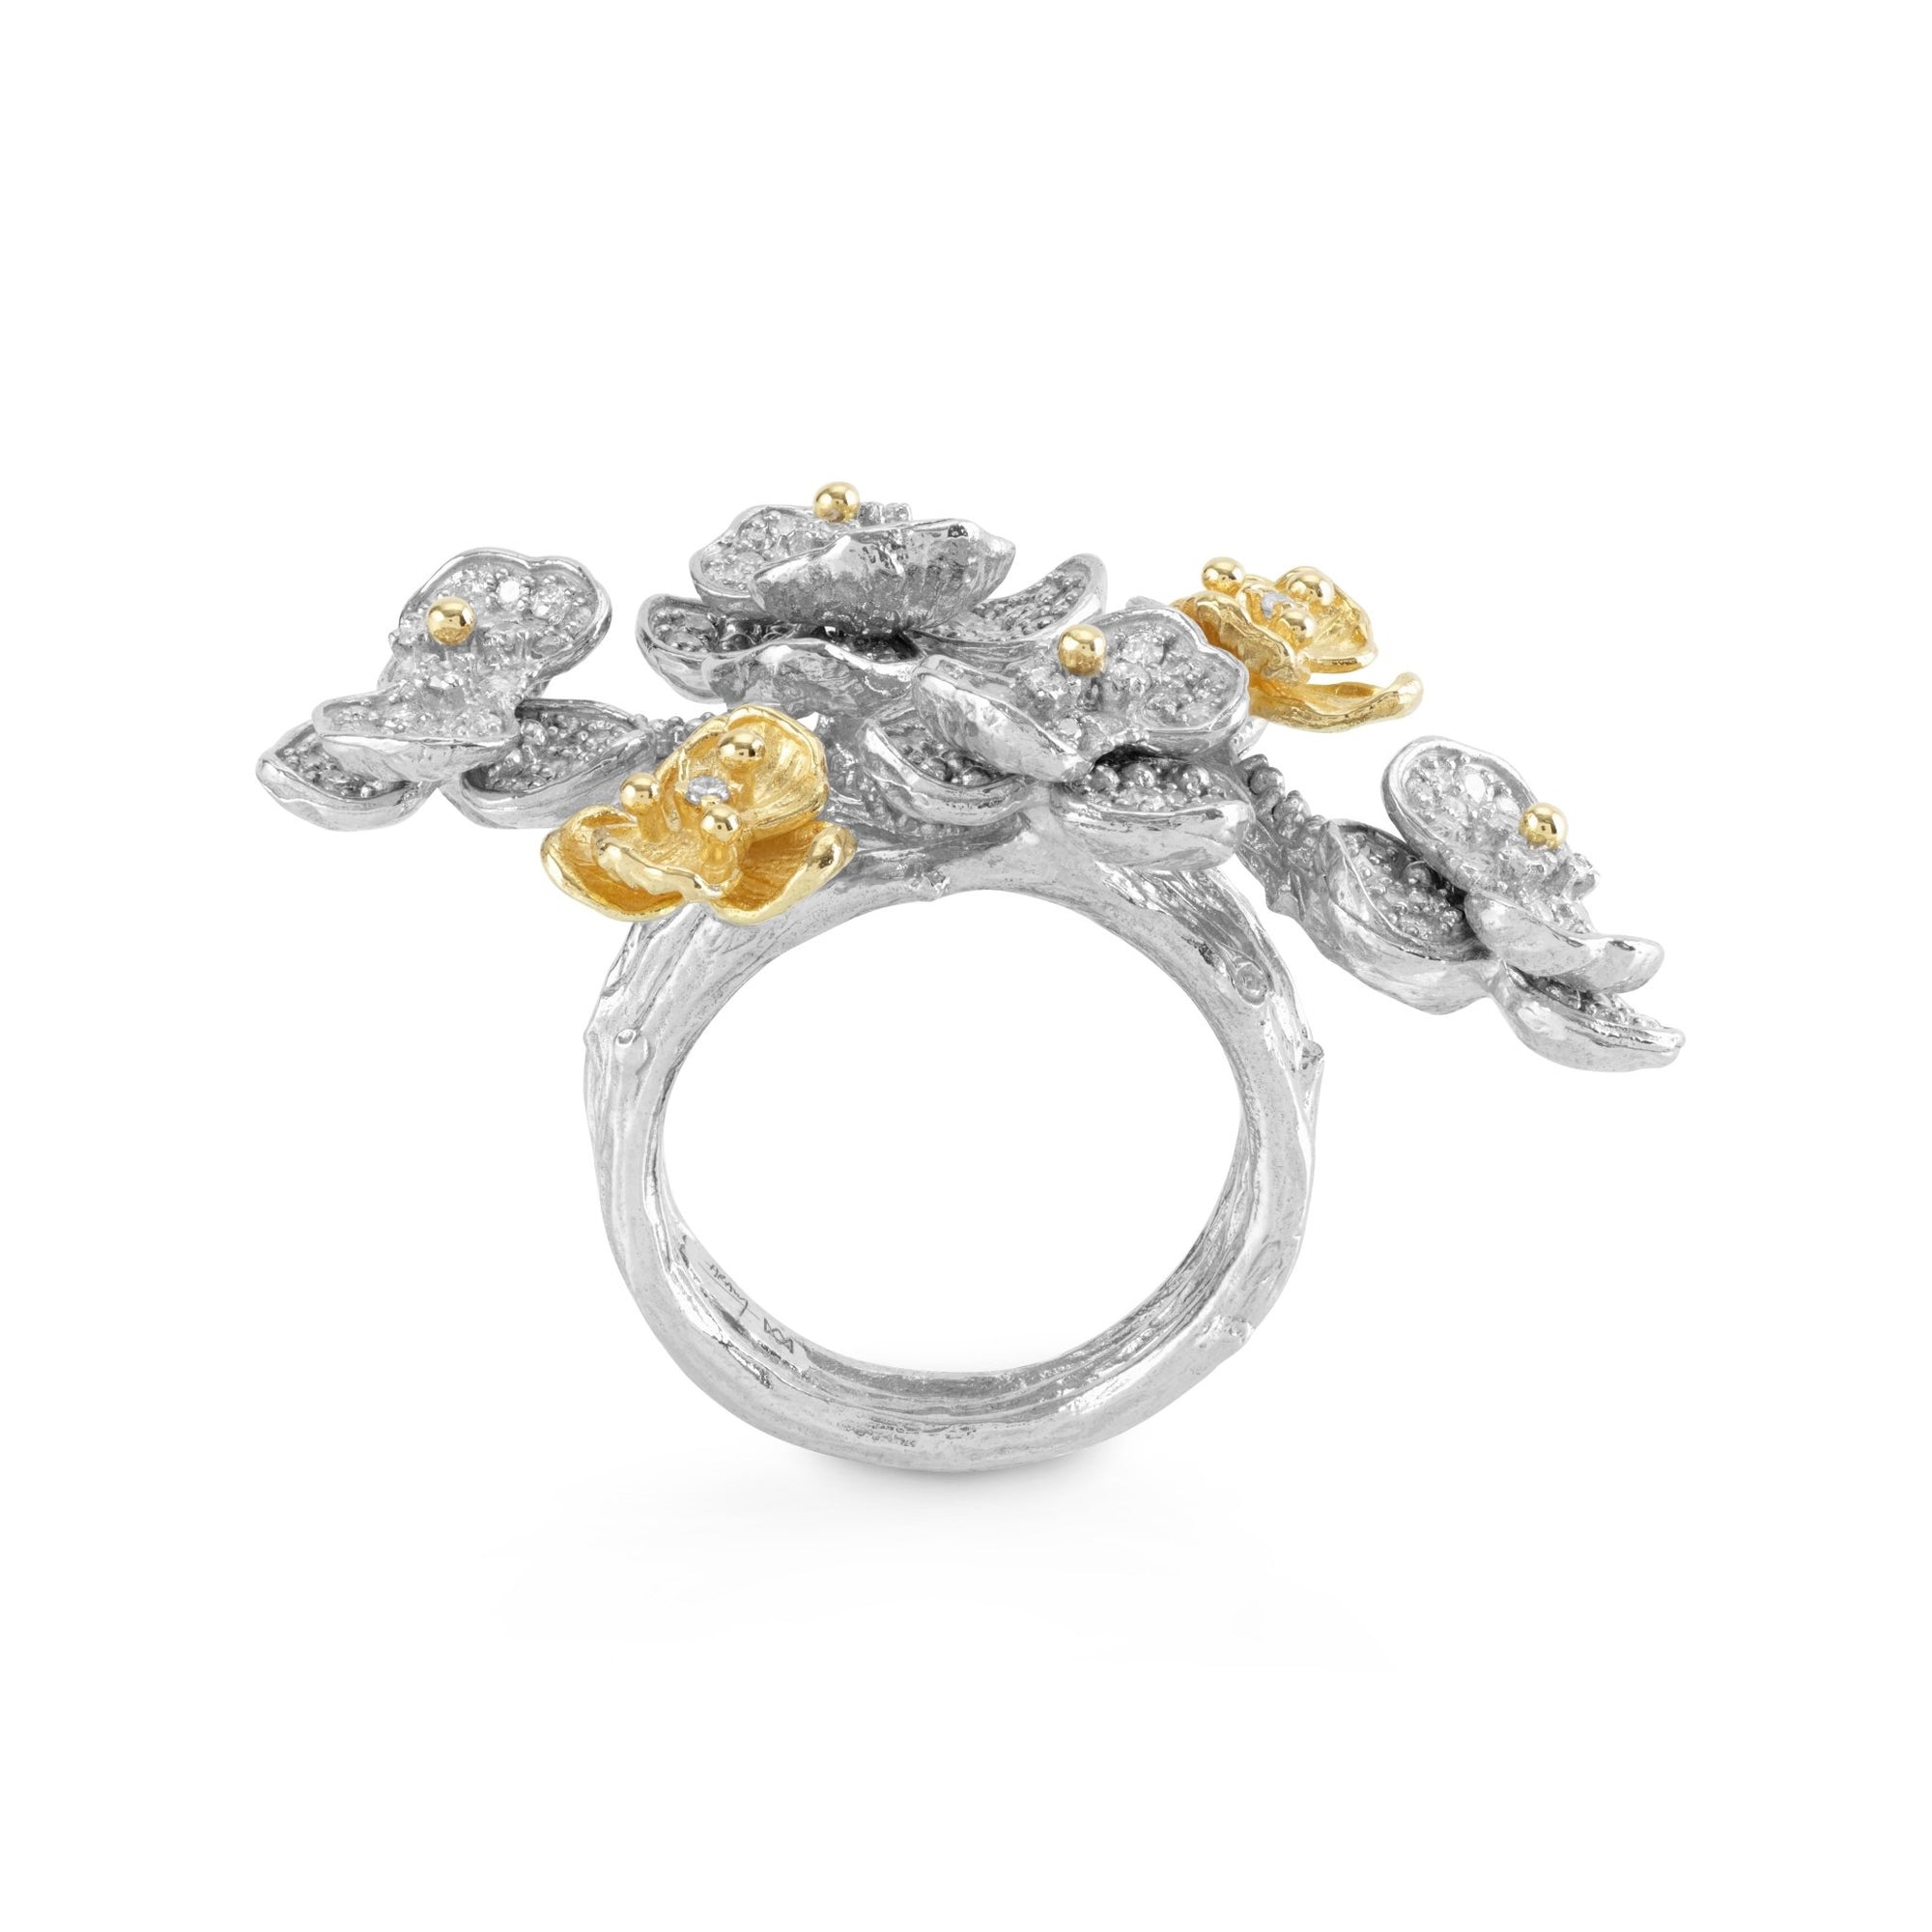 Michael Aram Orchid Cluster Ring with Diamonds